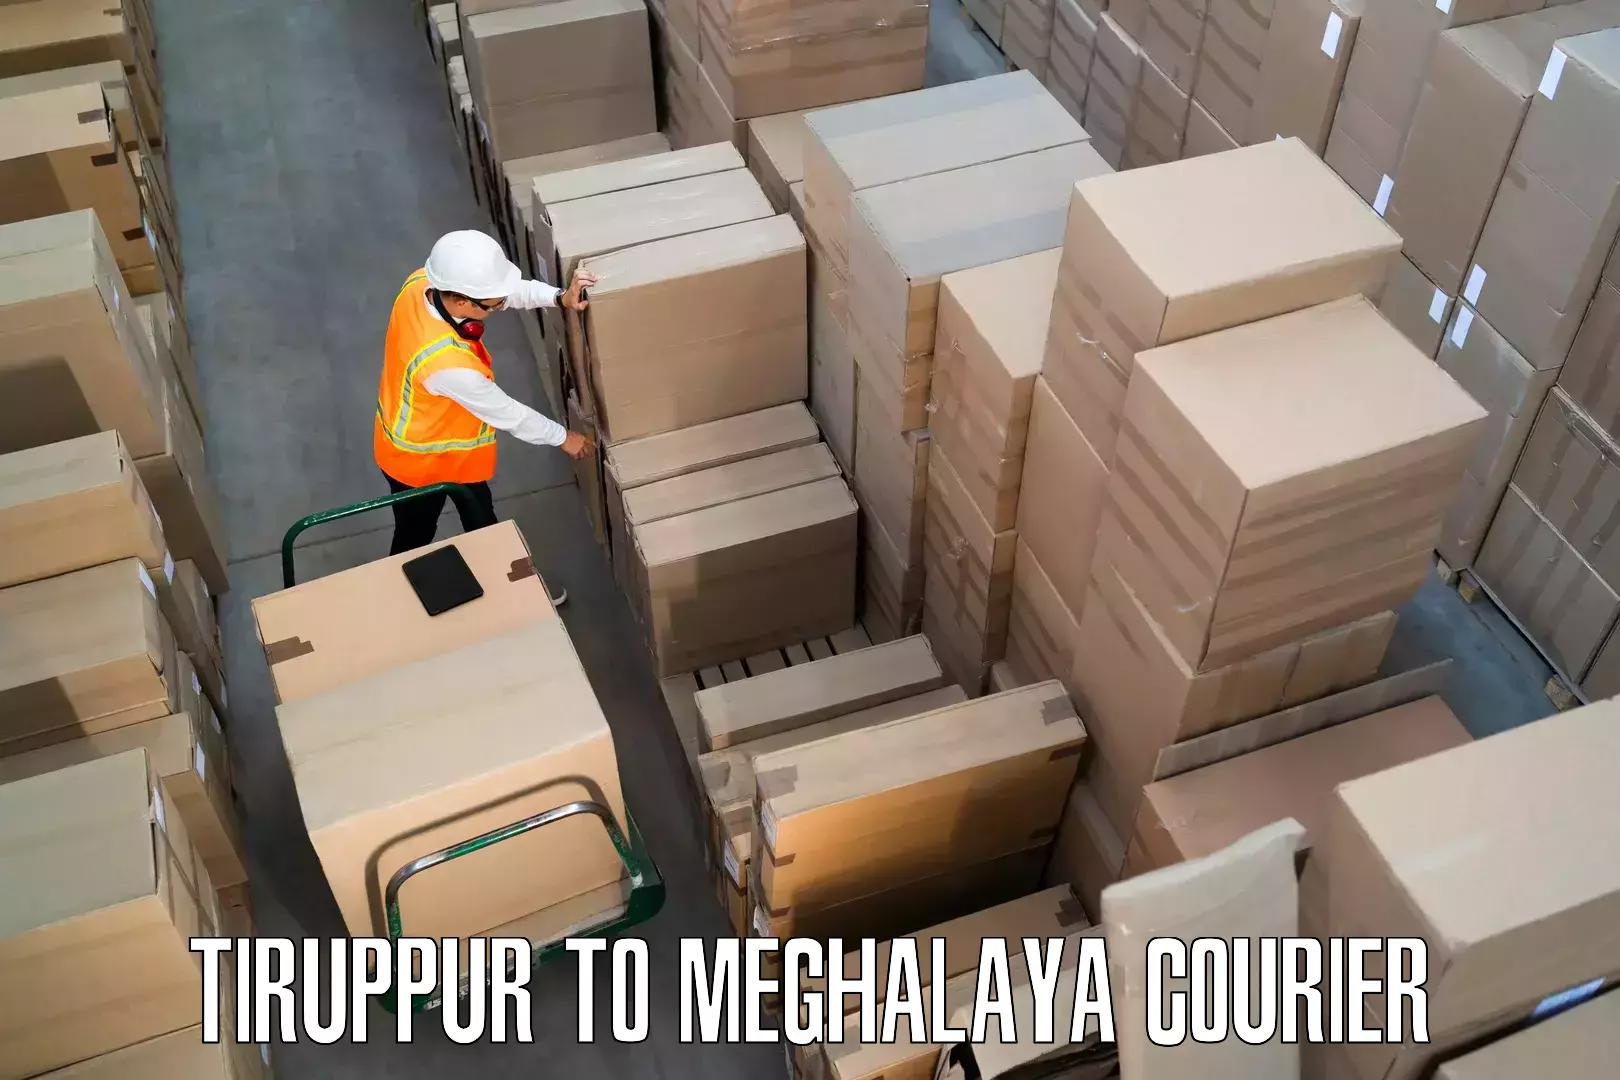 Furniture delivery service Tiruppur to Meghalaya